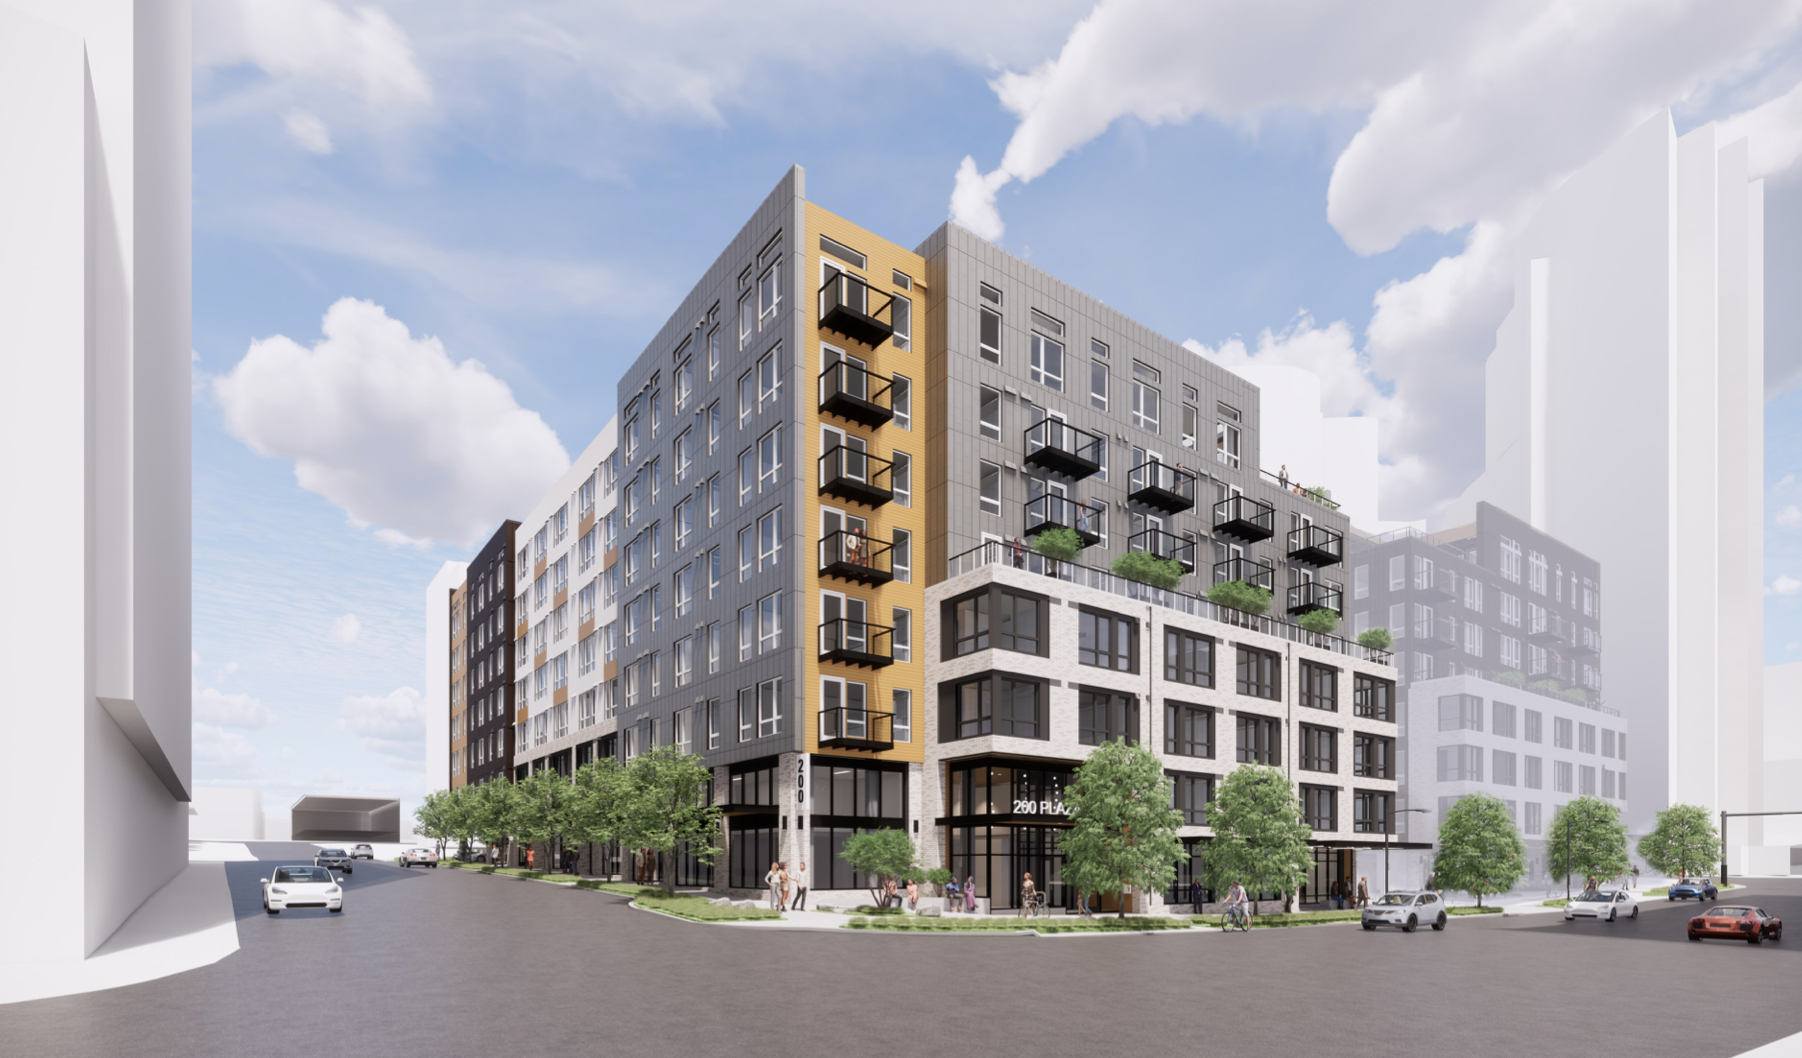 8-Story Residential Project in Bellevue Receives Design Review Approval